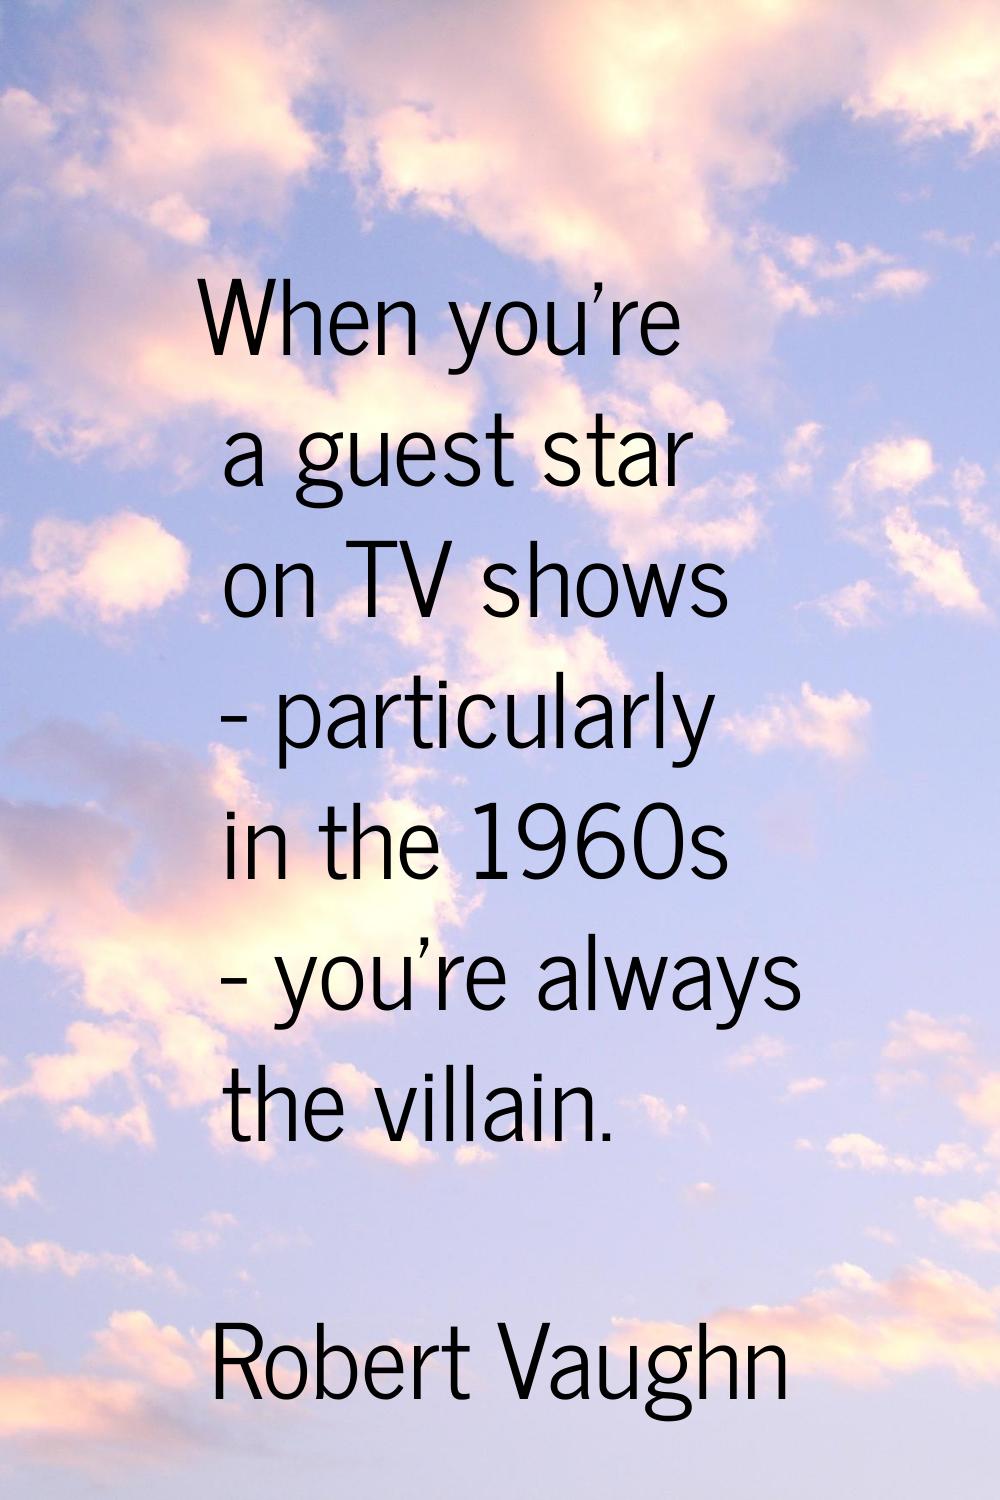 When you're a guest star on TV shows - particularly in the 1960s - you're always the villain.